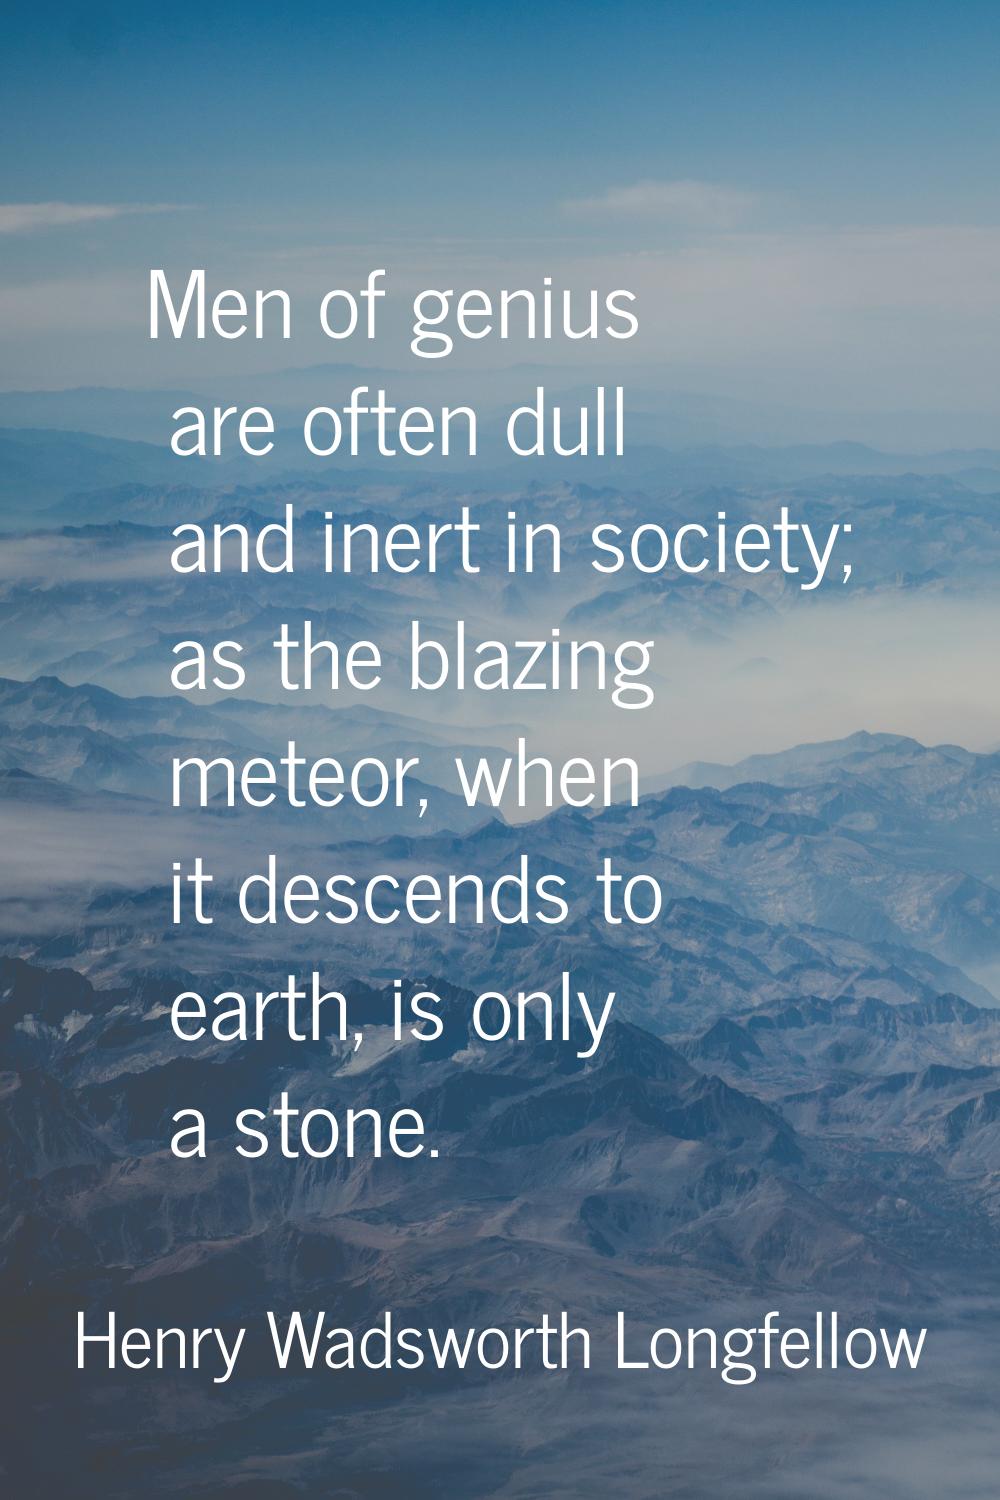 Men of genius are often dull and inert in society; as the blazing meteor, when it descends to earth